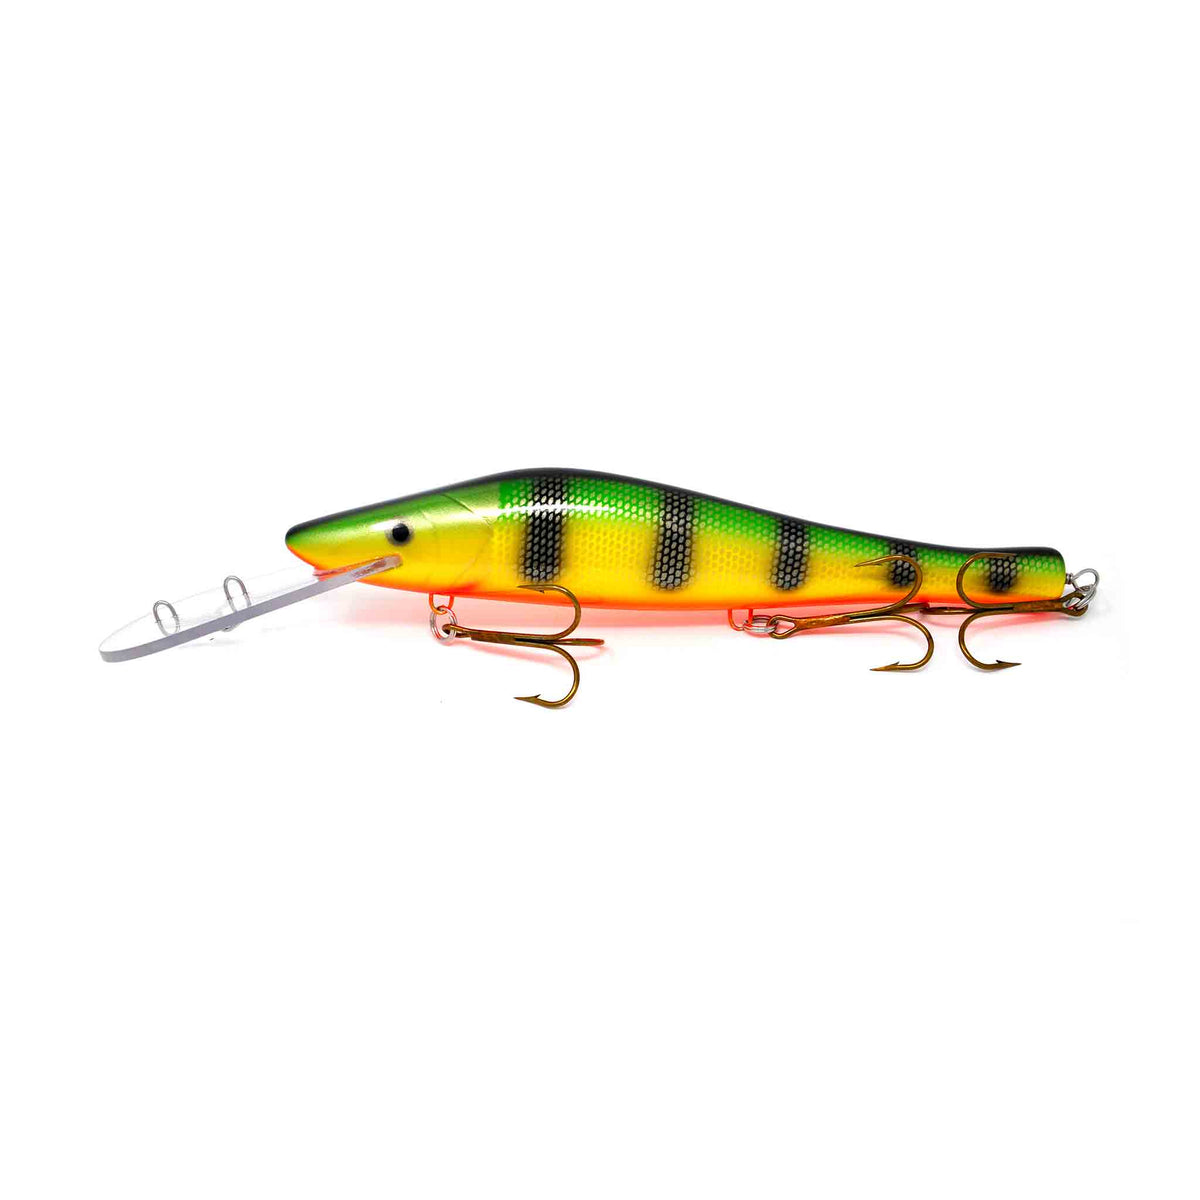 View of Crankbaits Legend lures The Plow Crankbait Perch / Orange Belly available at EZOKO Pike and Musky Shop